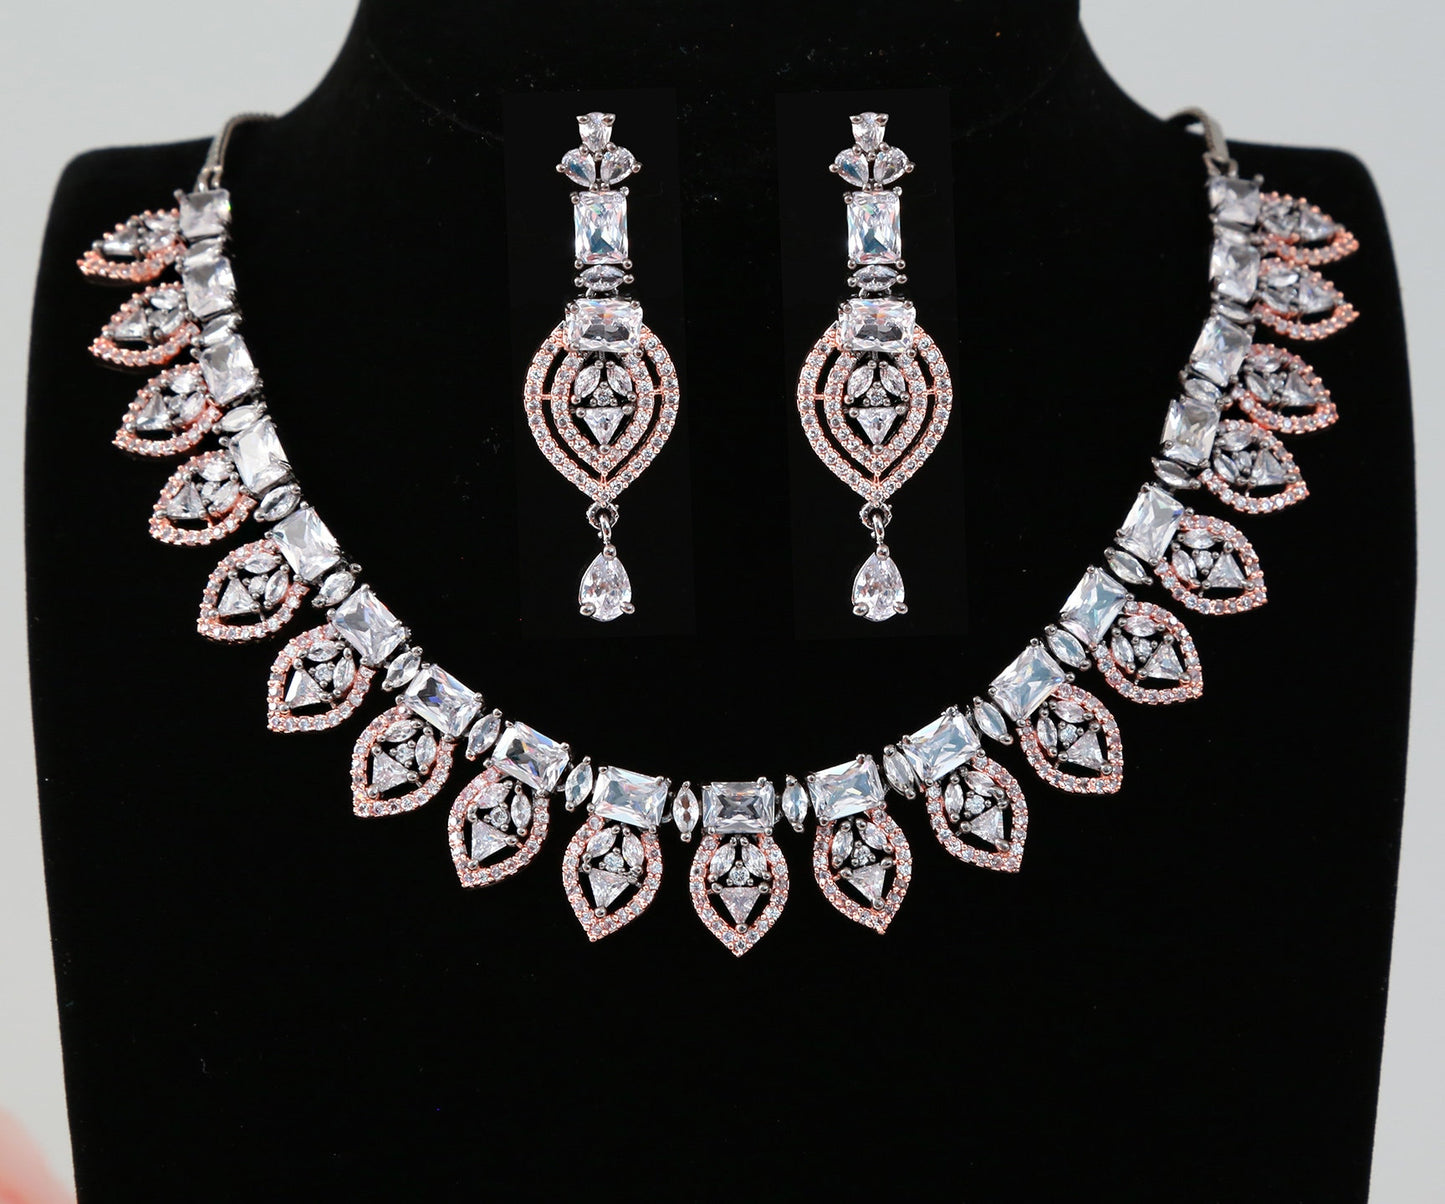 American diamond necklace in rose gold polish